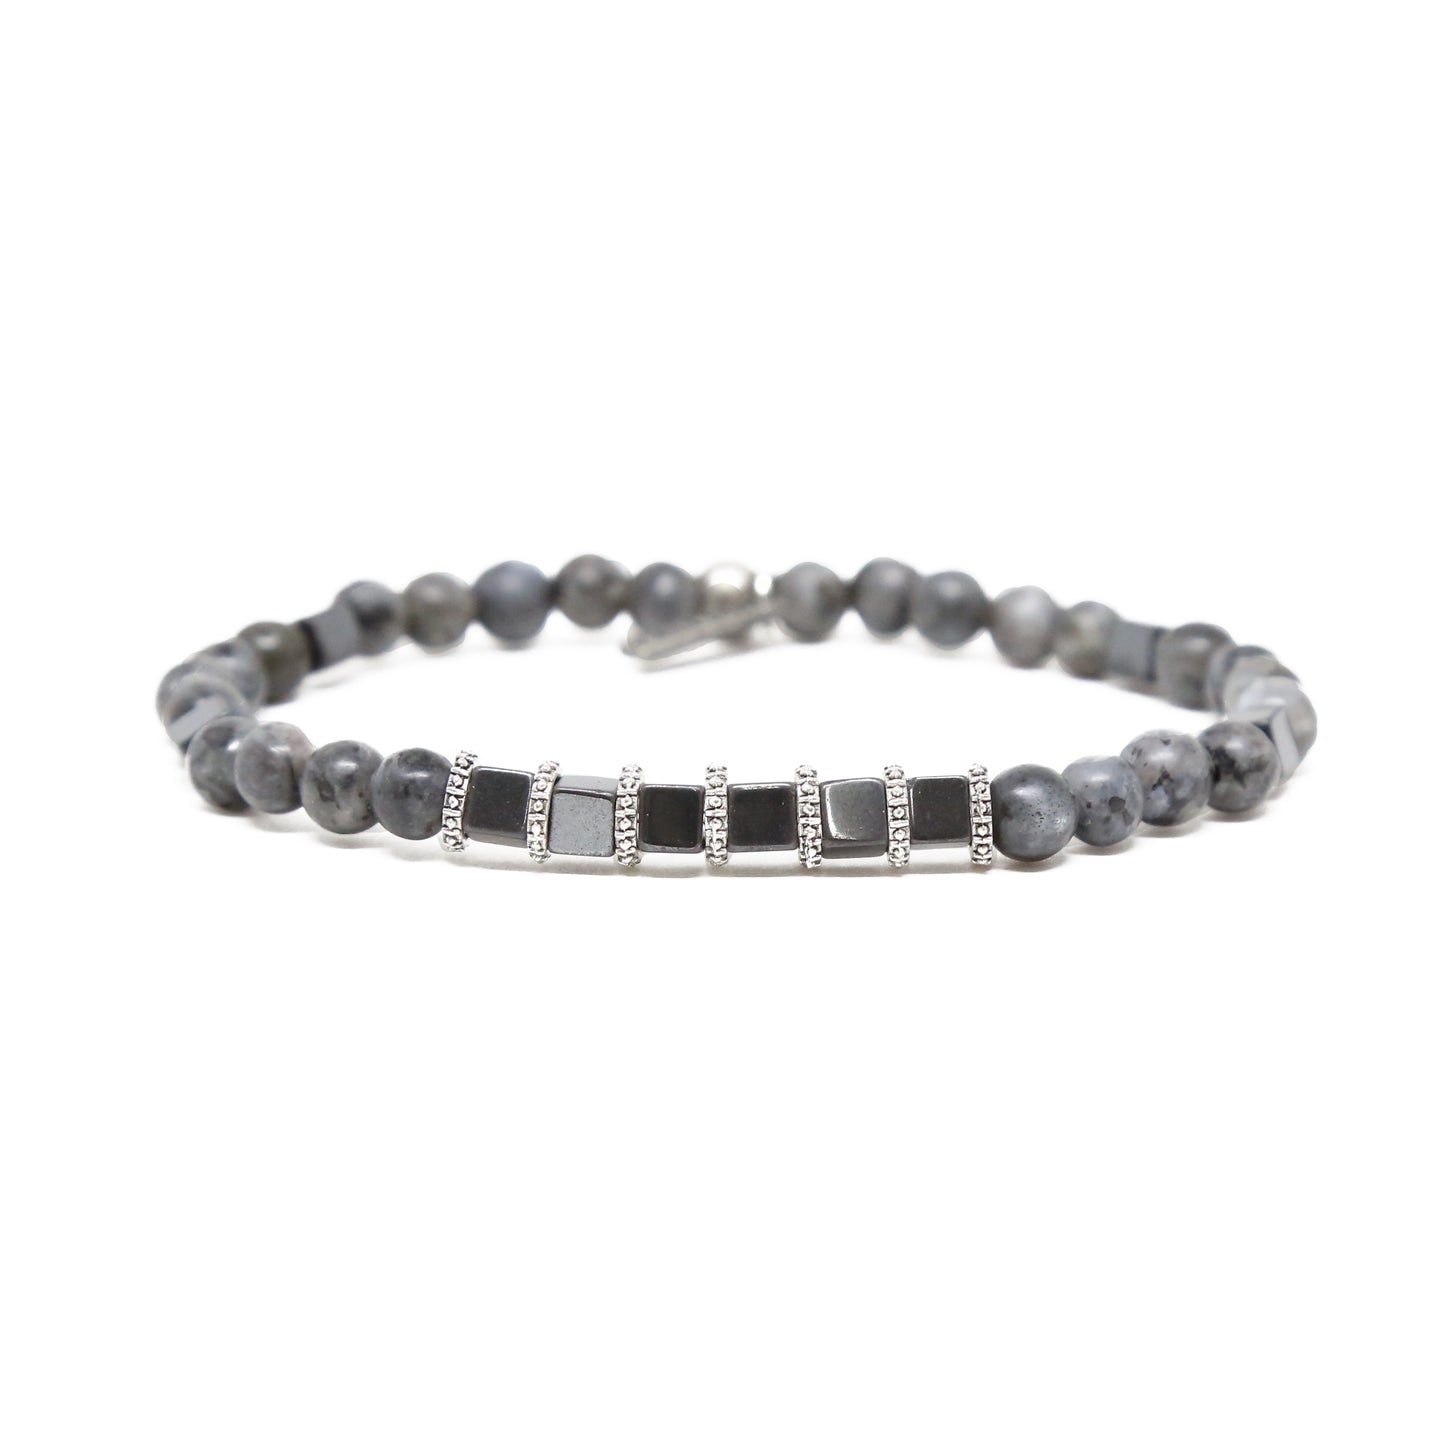 Charles Bracelet in Grey and Silver Ox